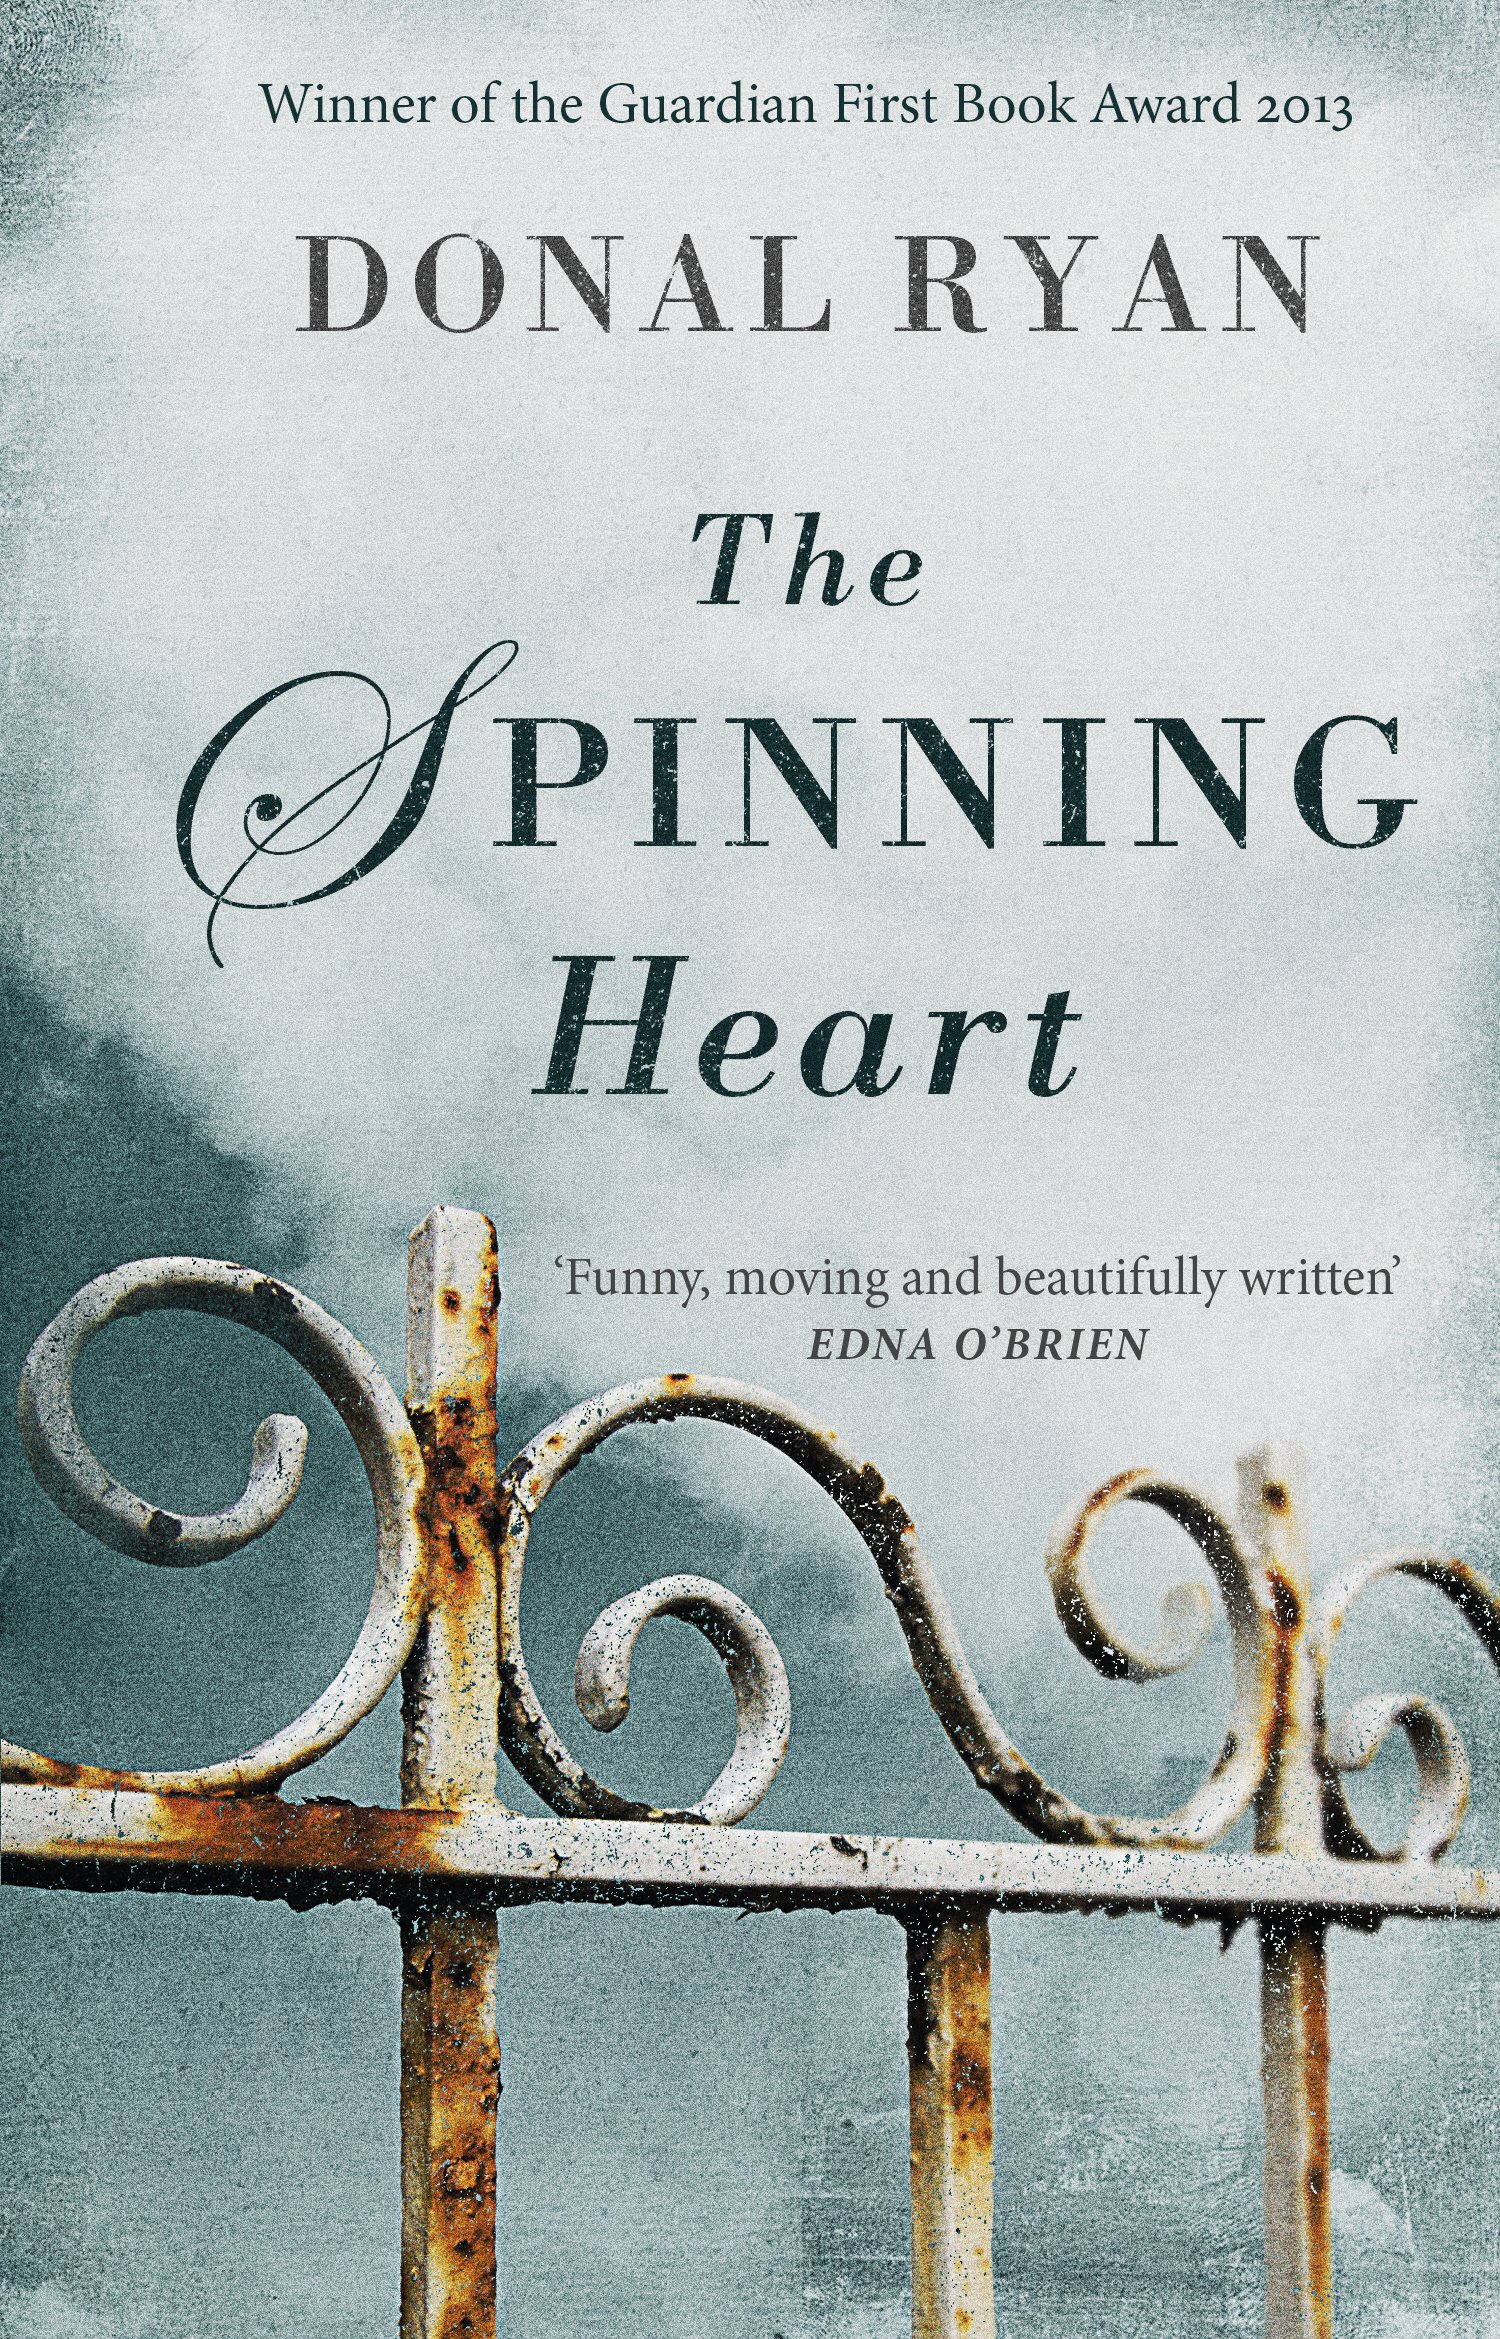 The Spinning Heart (O/P As Of 2/5/19)